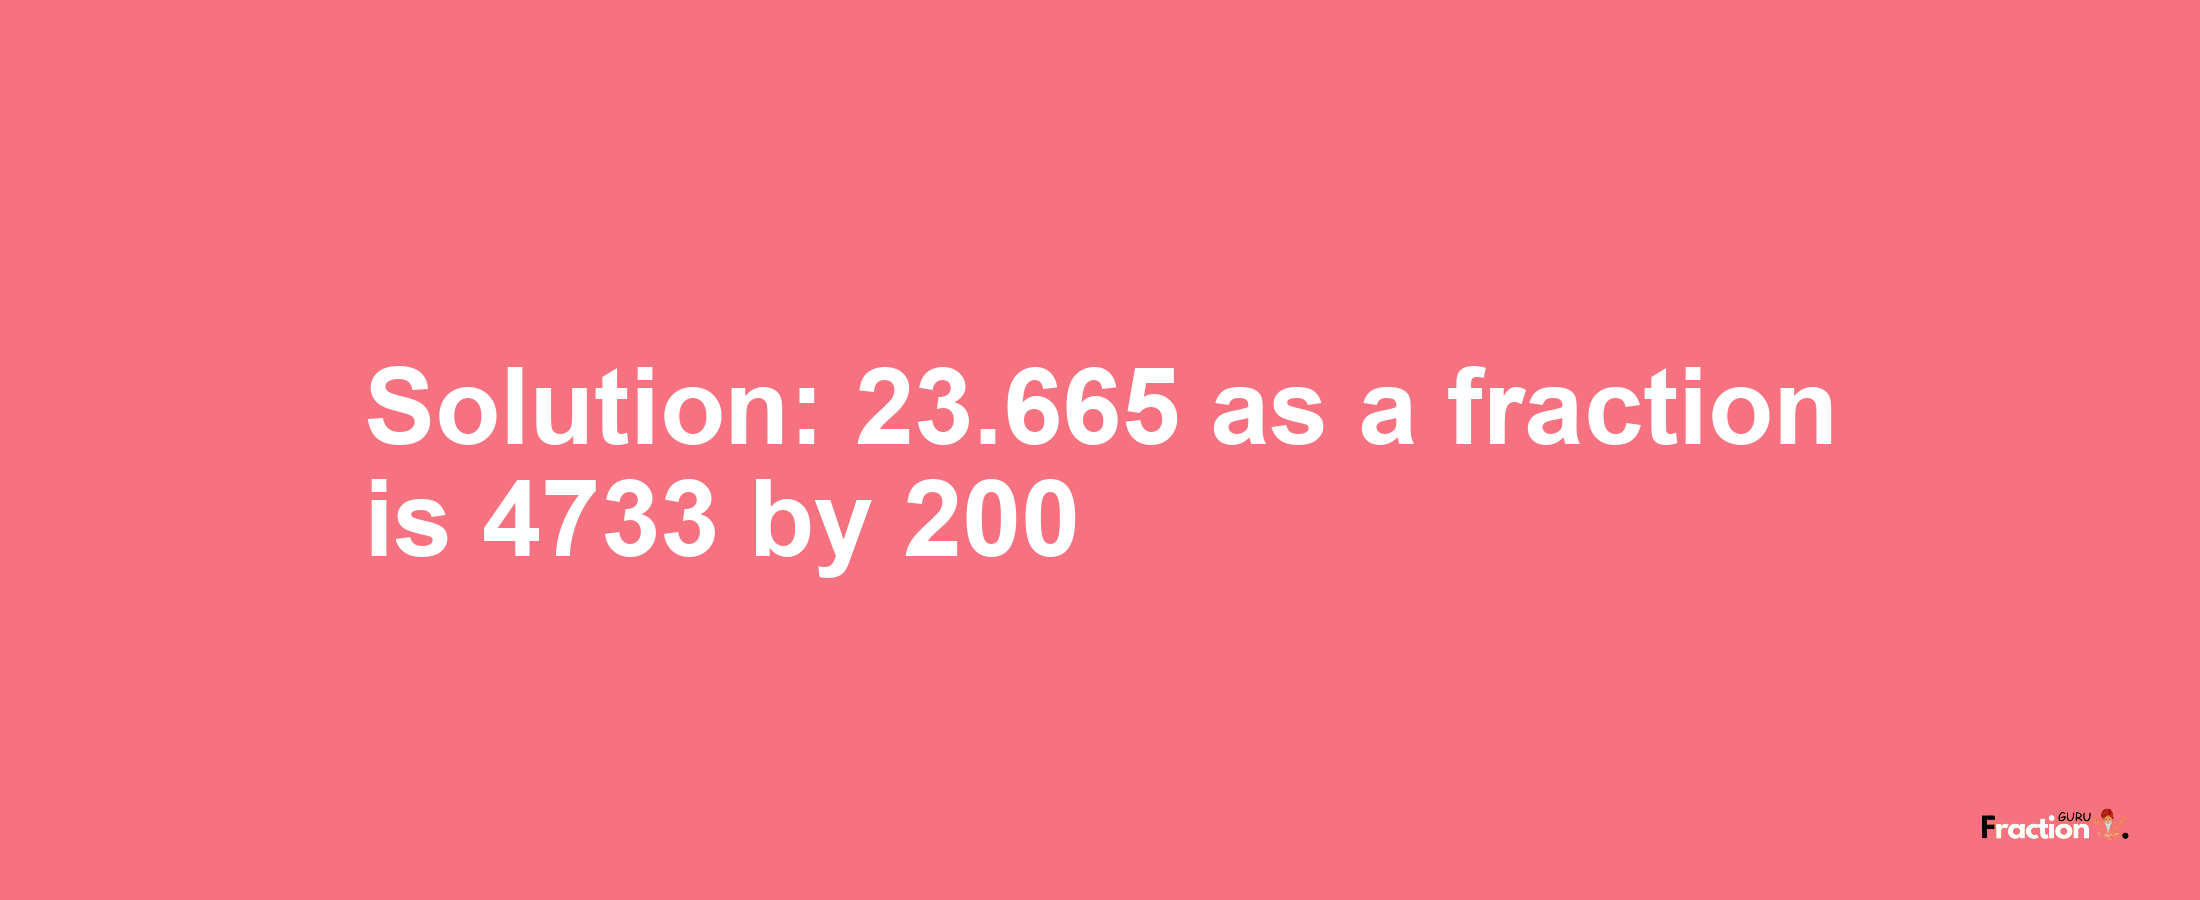 Solution:23.665 as a fraction is 4733/200